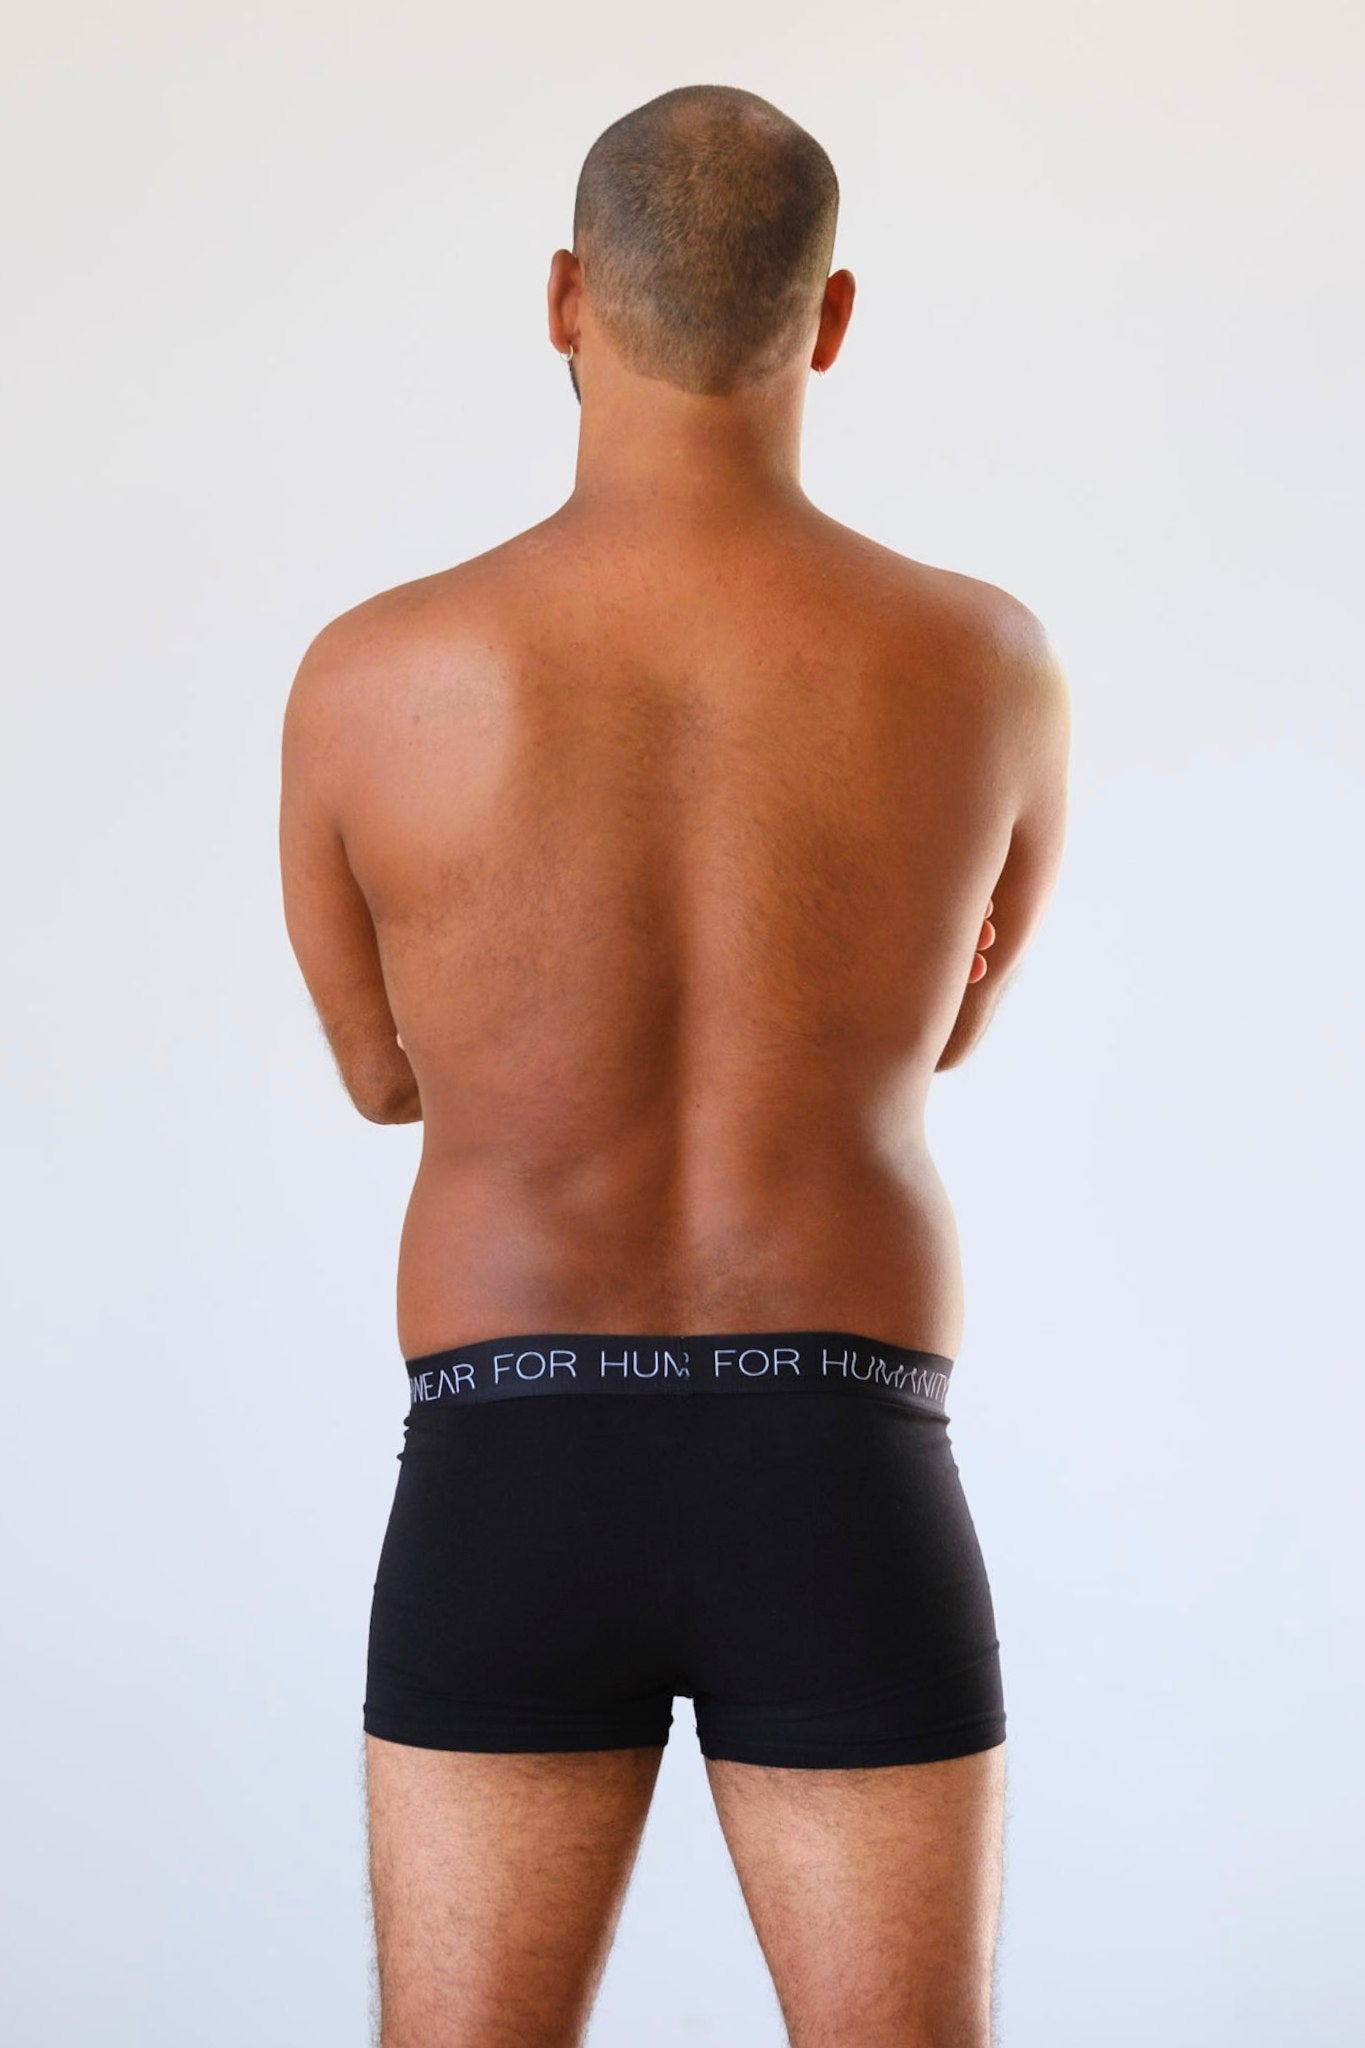 Sustainable, ethically made black trunk style underwear. Long leg, wide thigh fit with elastic bind, no riding, cup support close to the body. made with organic fabric and recycled elastic, thin, no dig waist band. Model wears shorts